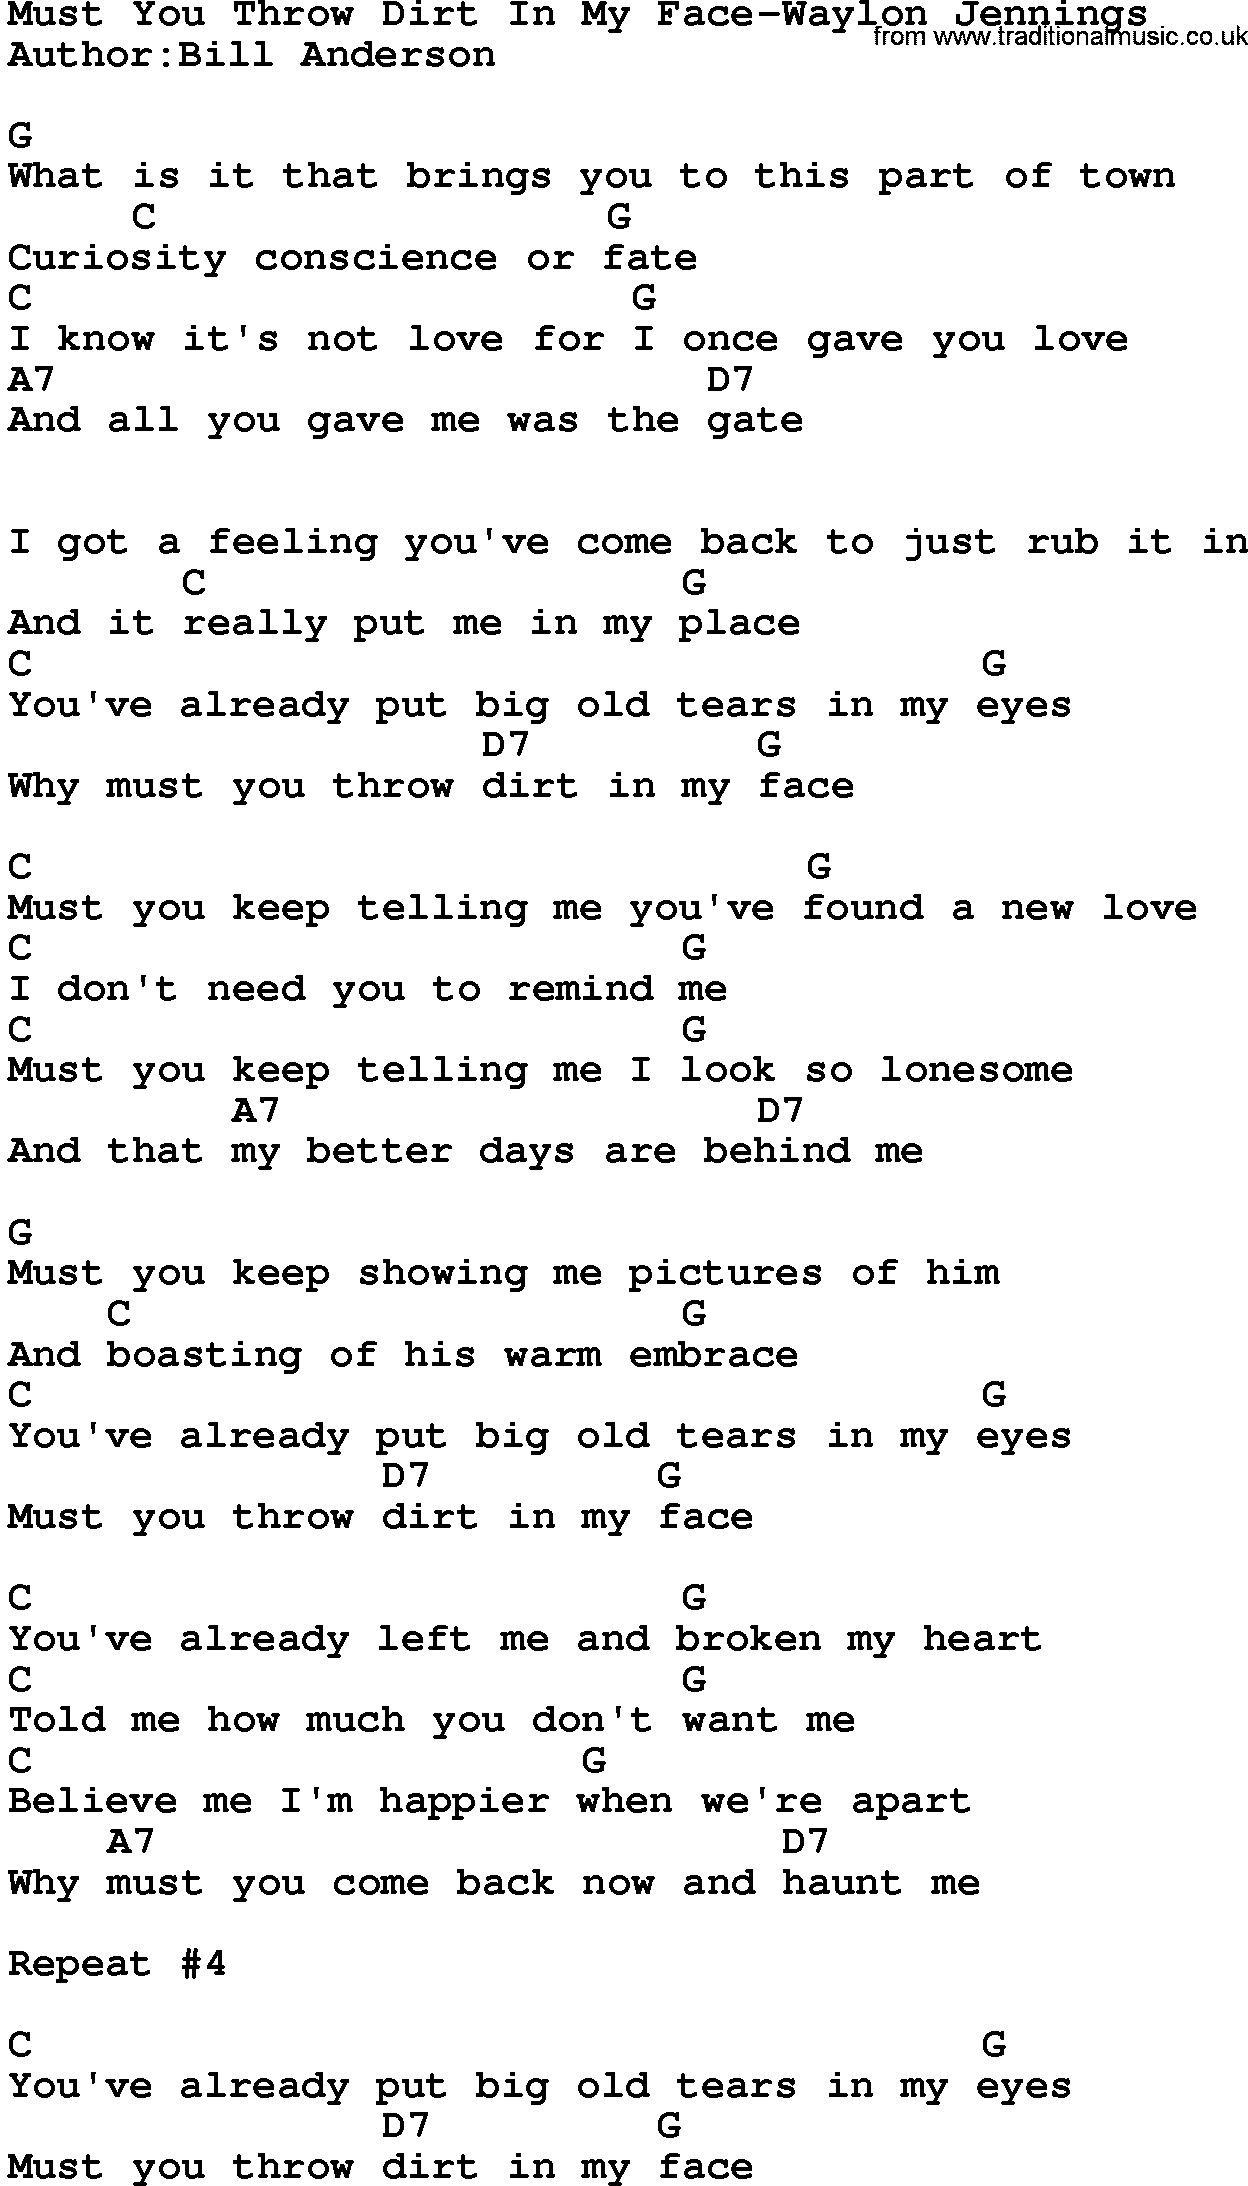 Country music song: Must You Throw Dirt In My Face-Waylon Jennings lyrics and chords